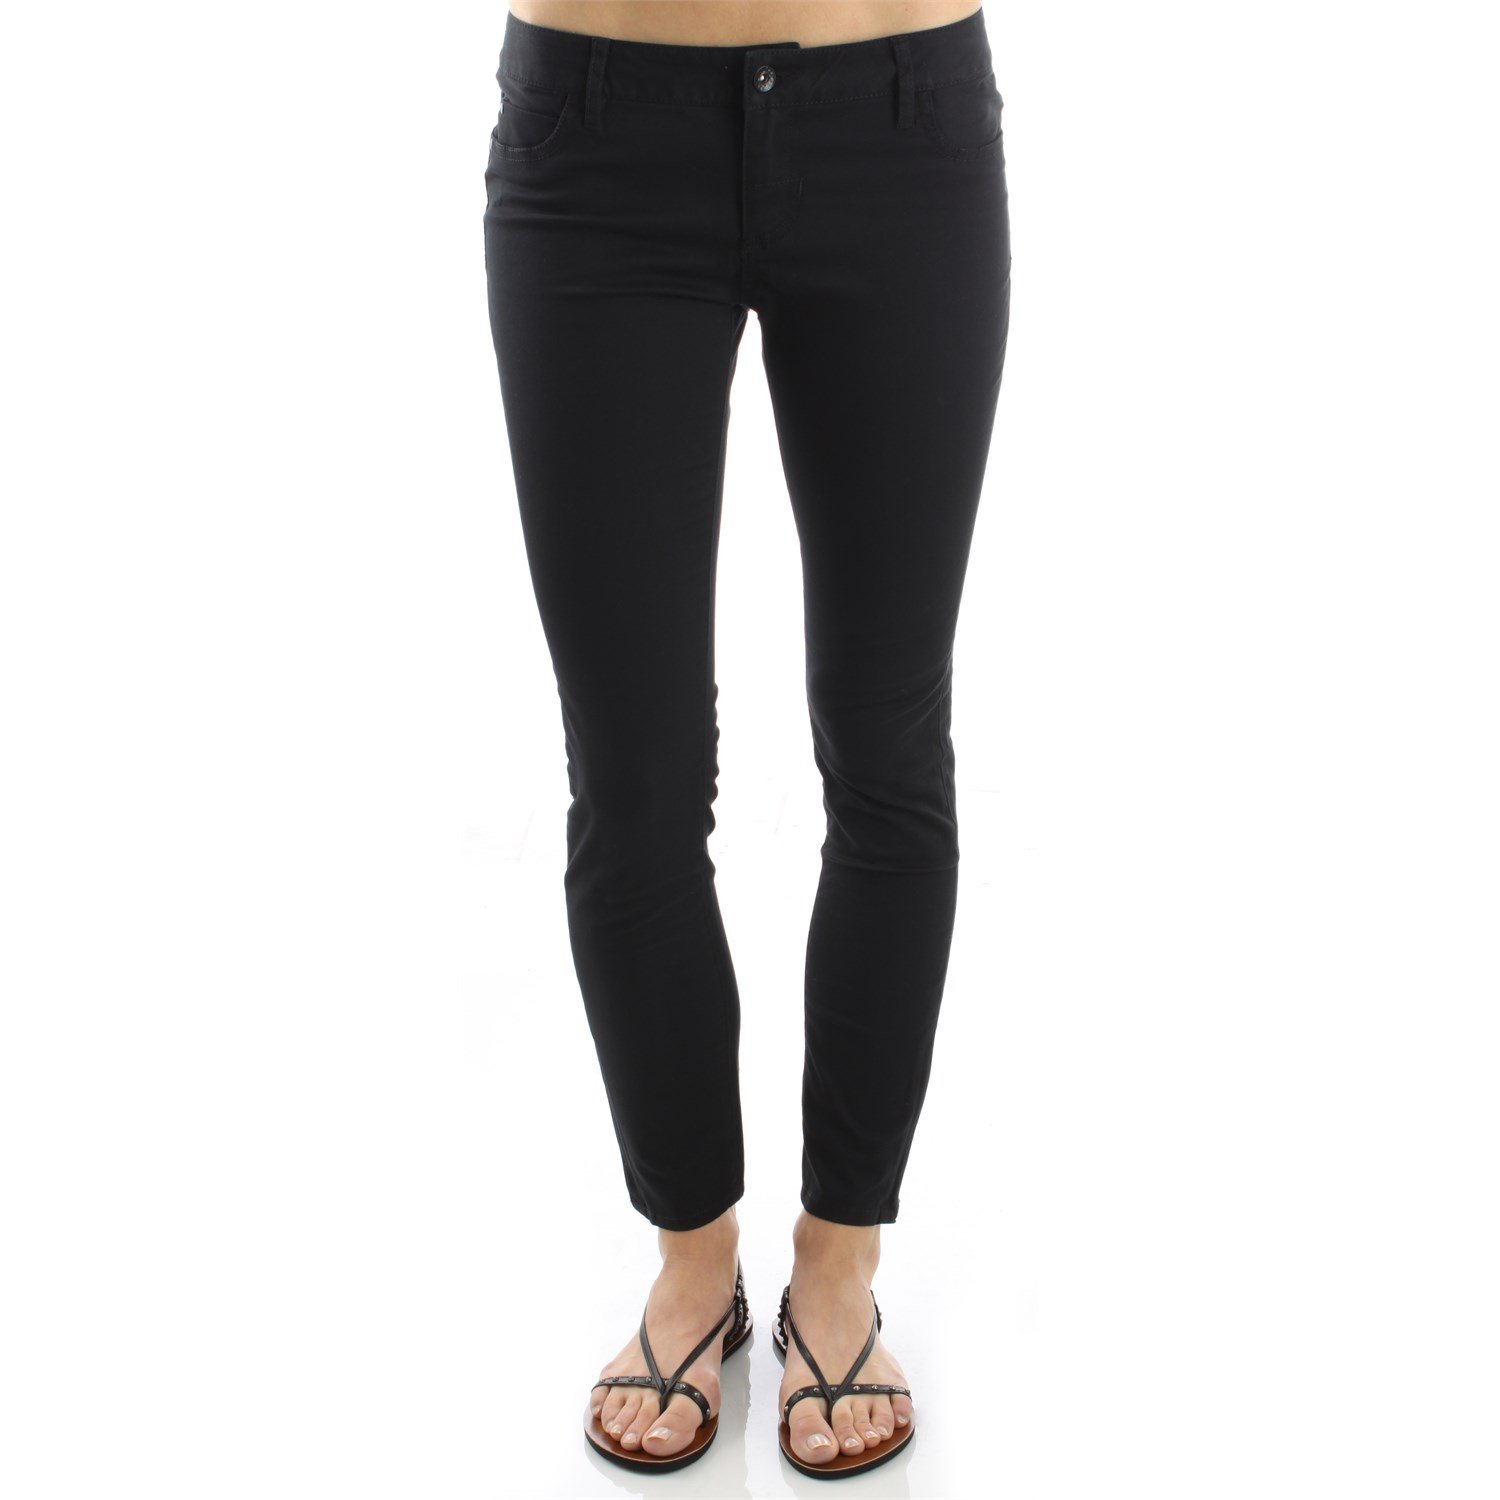 Vans Extreme Skinny Pants - Women's | evo outlet